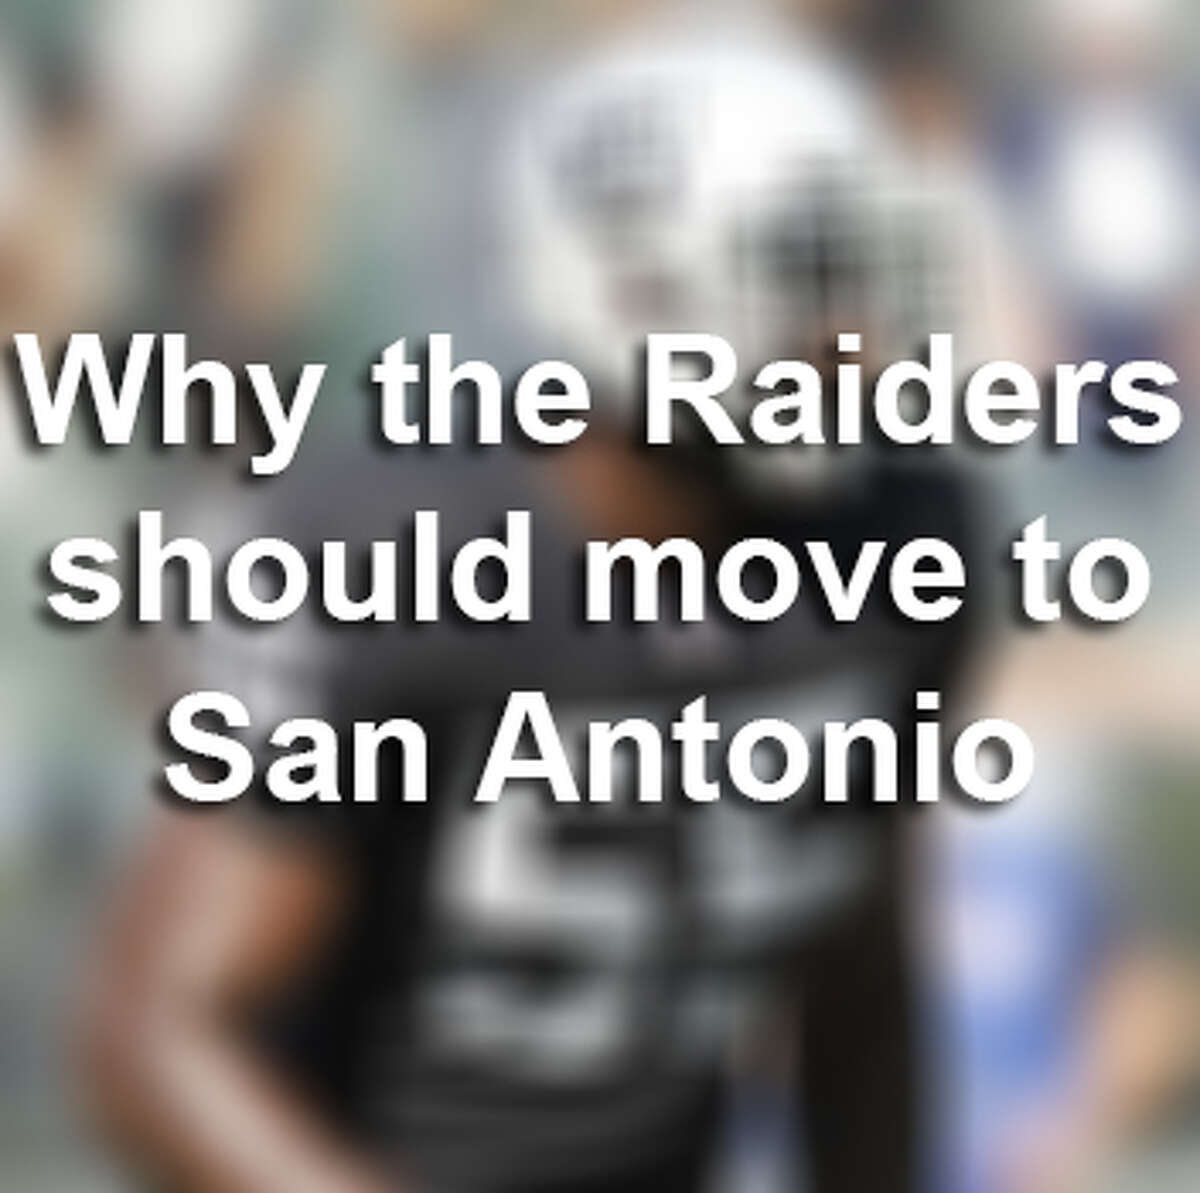 The Oakland Raiders have spoken with top city officials about moving the historic franchise to the Alamo City. Here are 9 reasons why the Raiders should come to San Antonio.